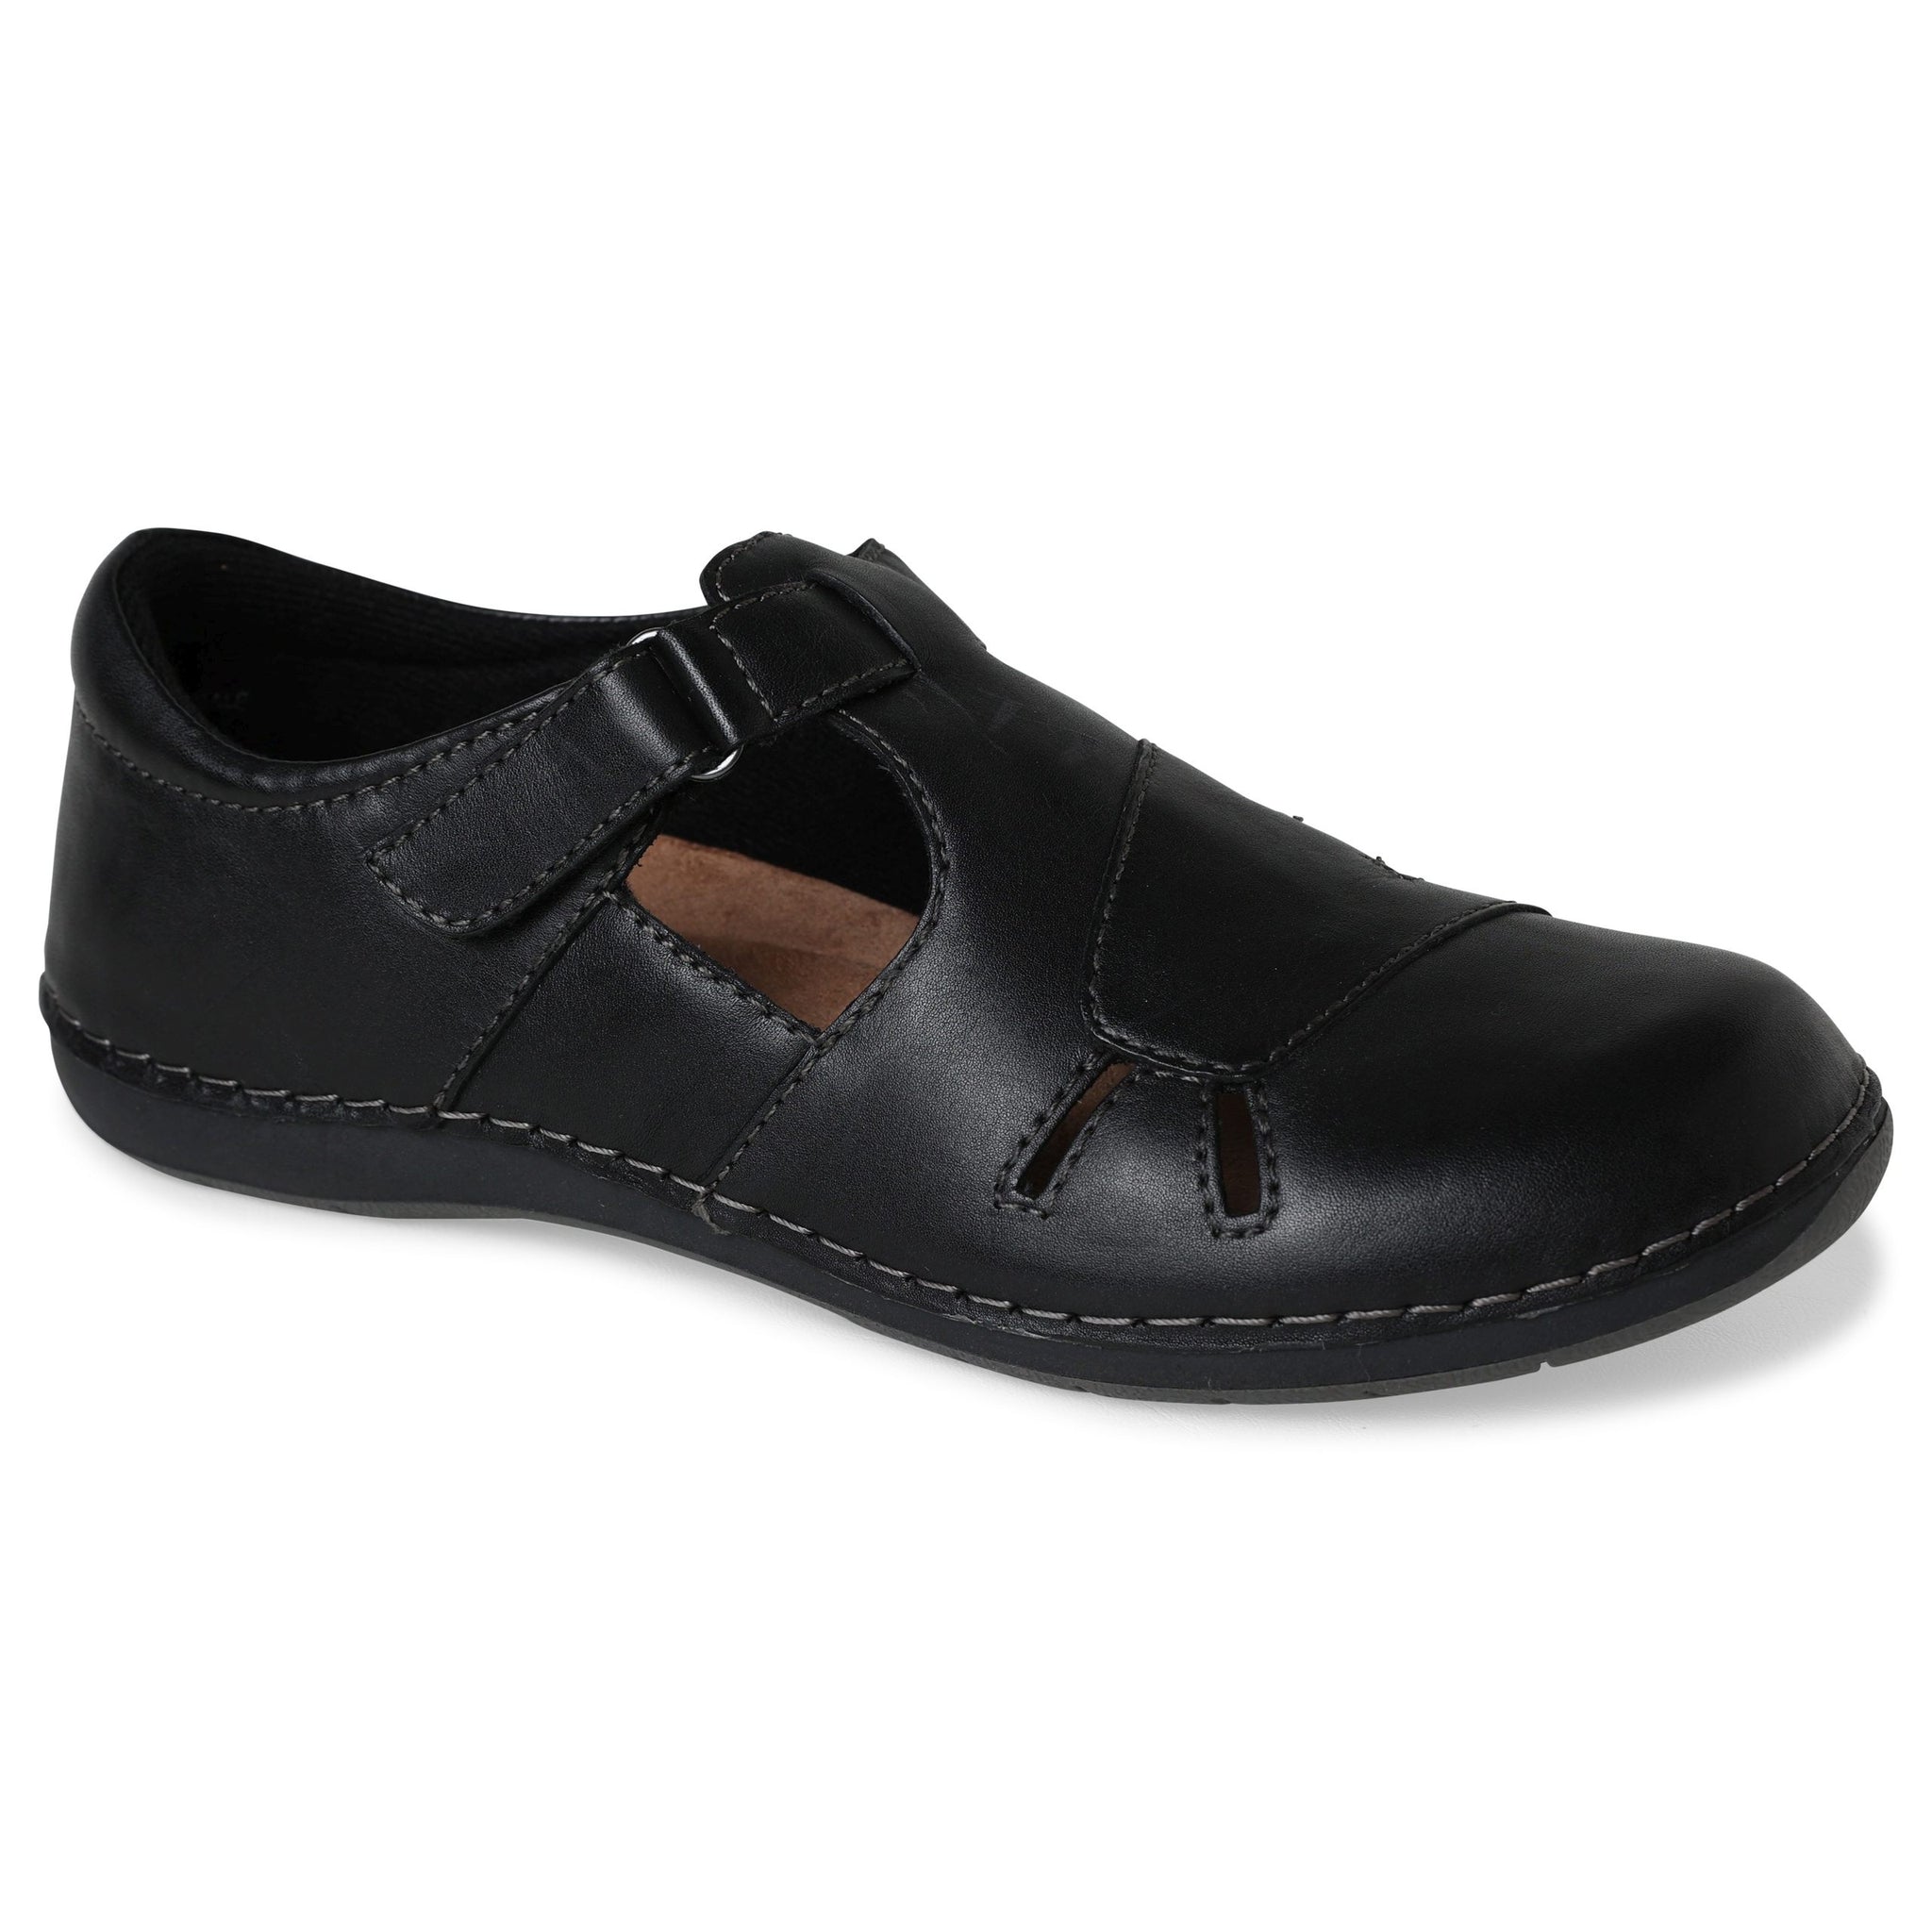 Buy quality Penny2 - Black Slip On from Planet shoes